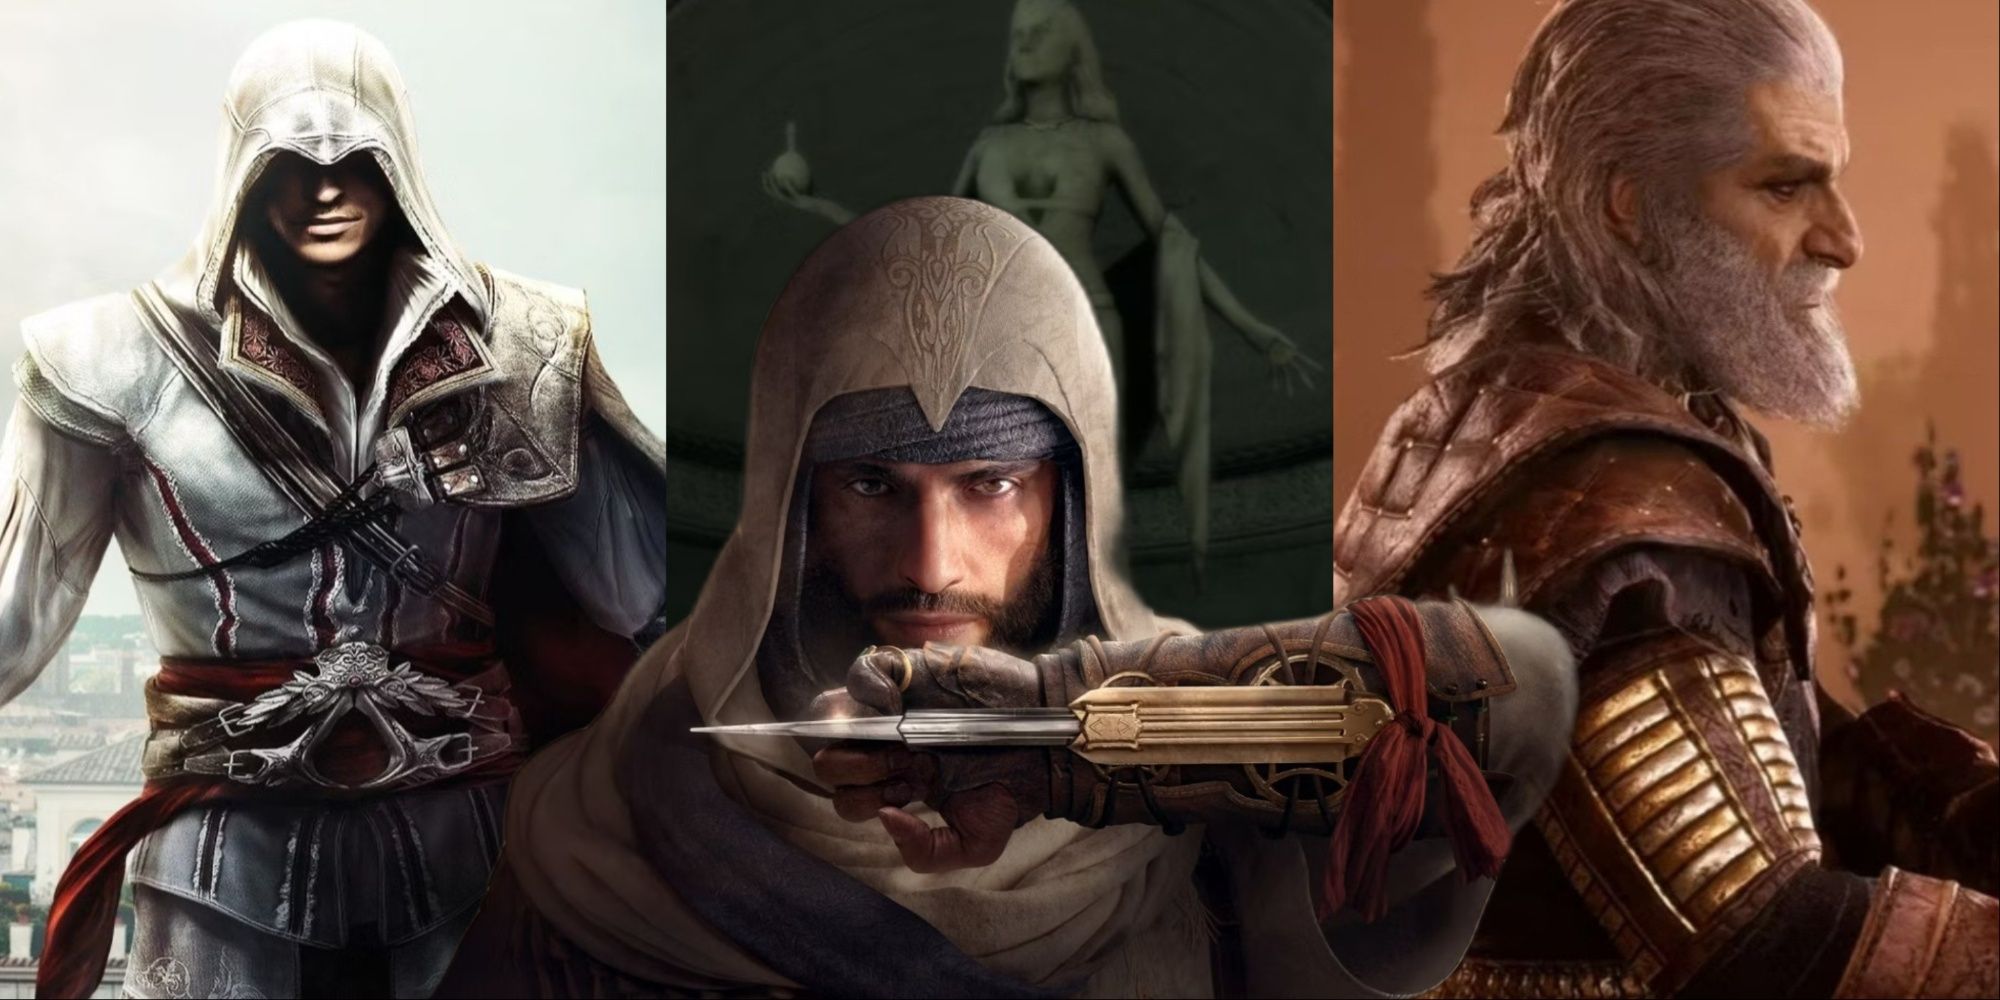 A three-image collage of Ezio from the Trilogy Cover Art, the statue of Iltani in AC2, and Darius from the AC Odyssey DLC, with Basim with his hidden blade out in the center.